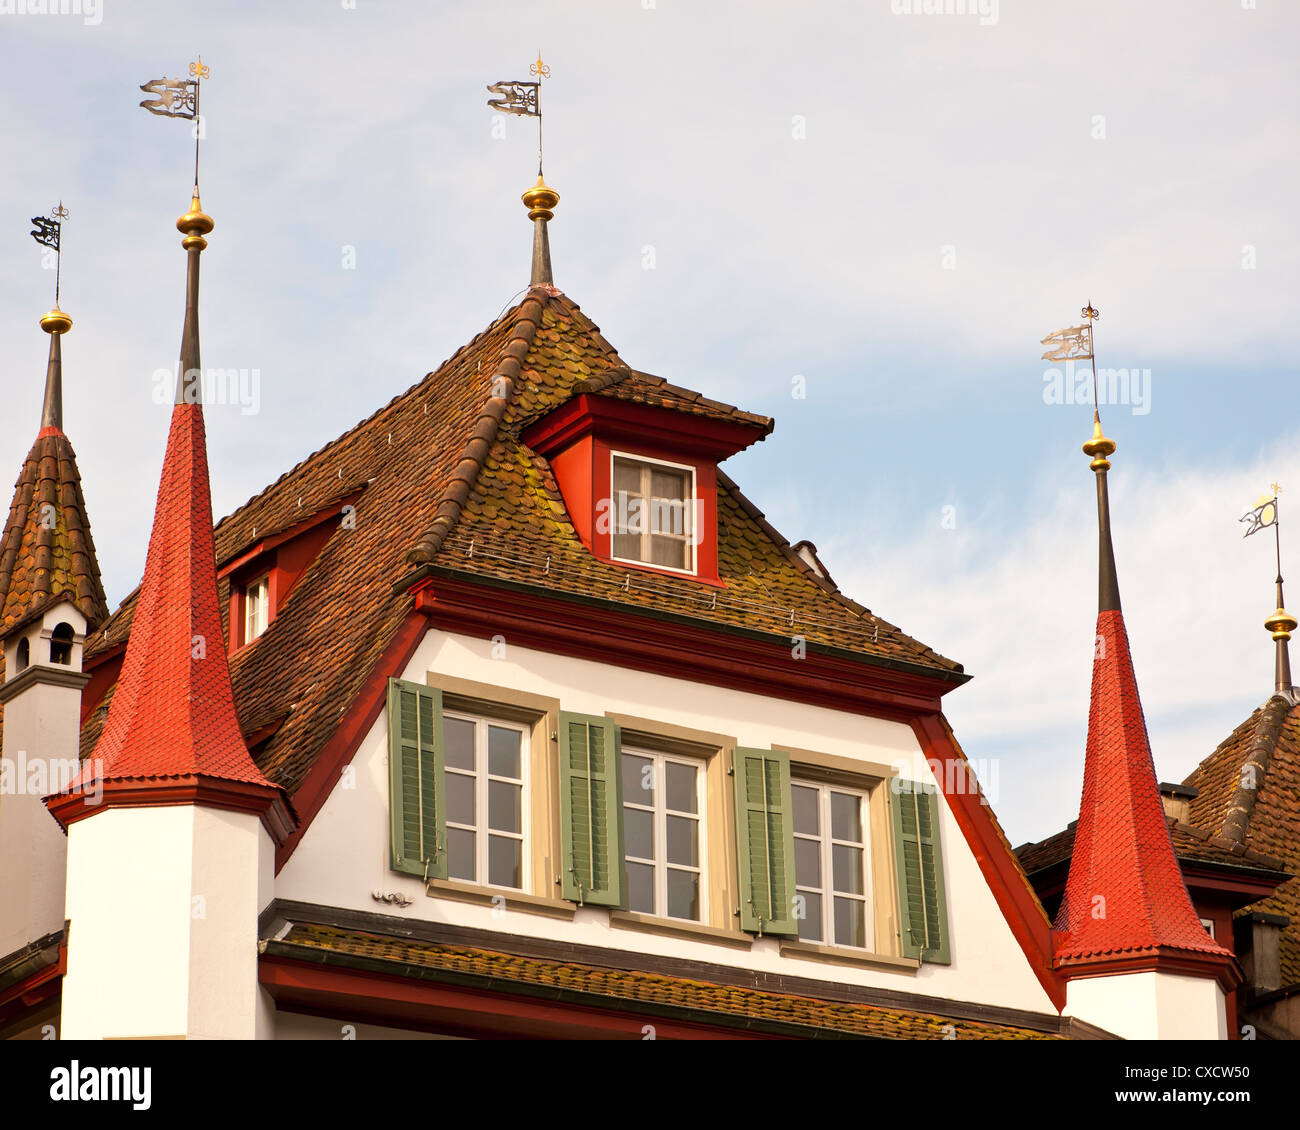 Wind vanes atop a canal house in Lucerne Stock Photo